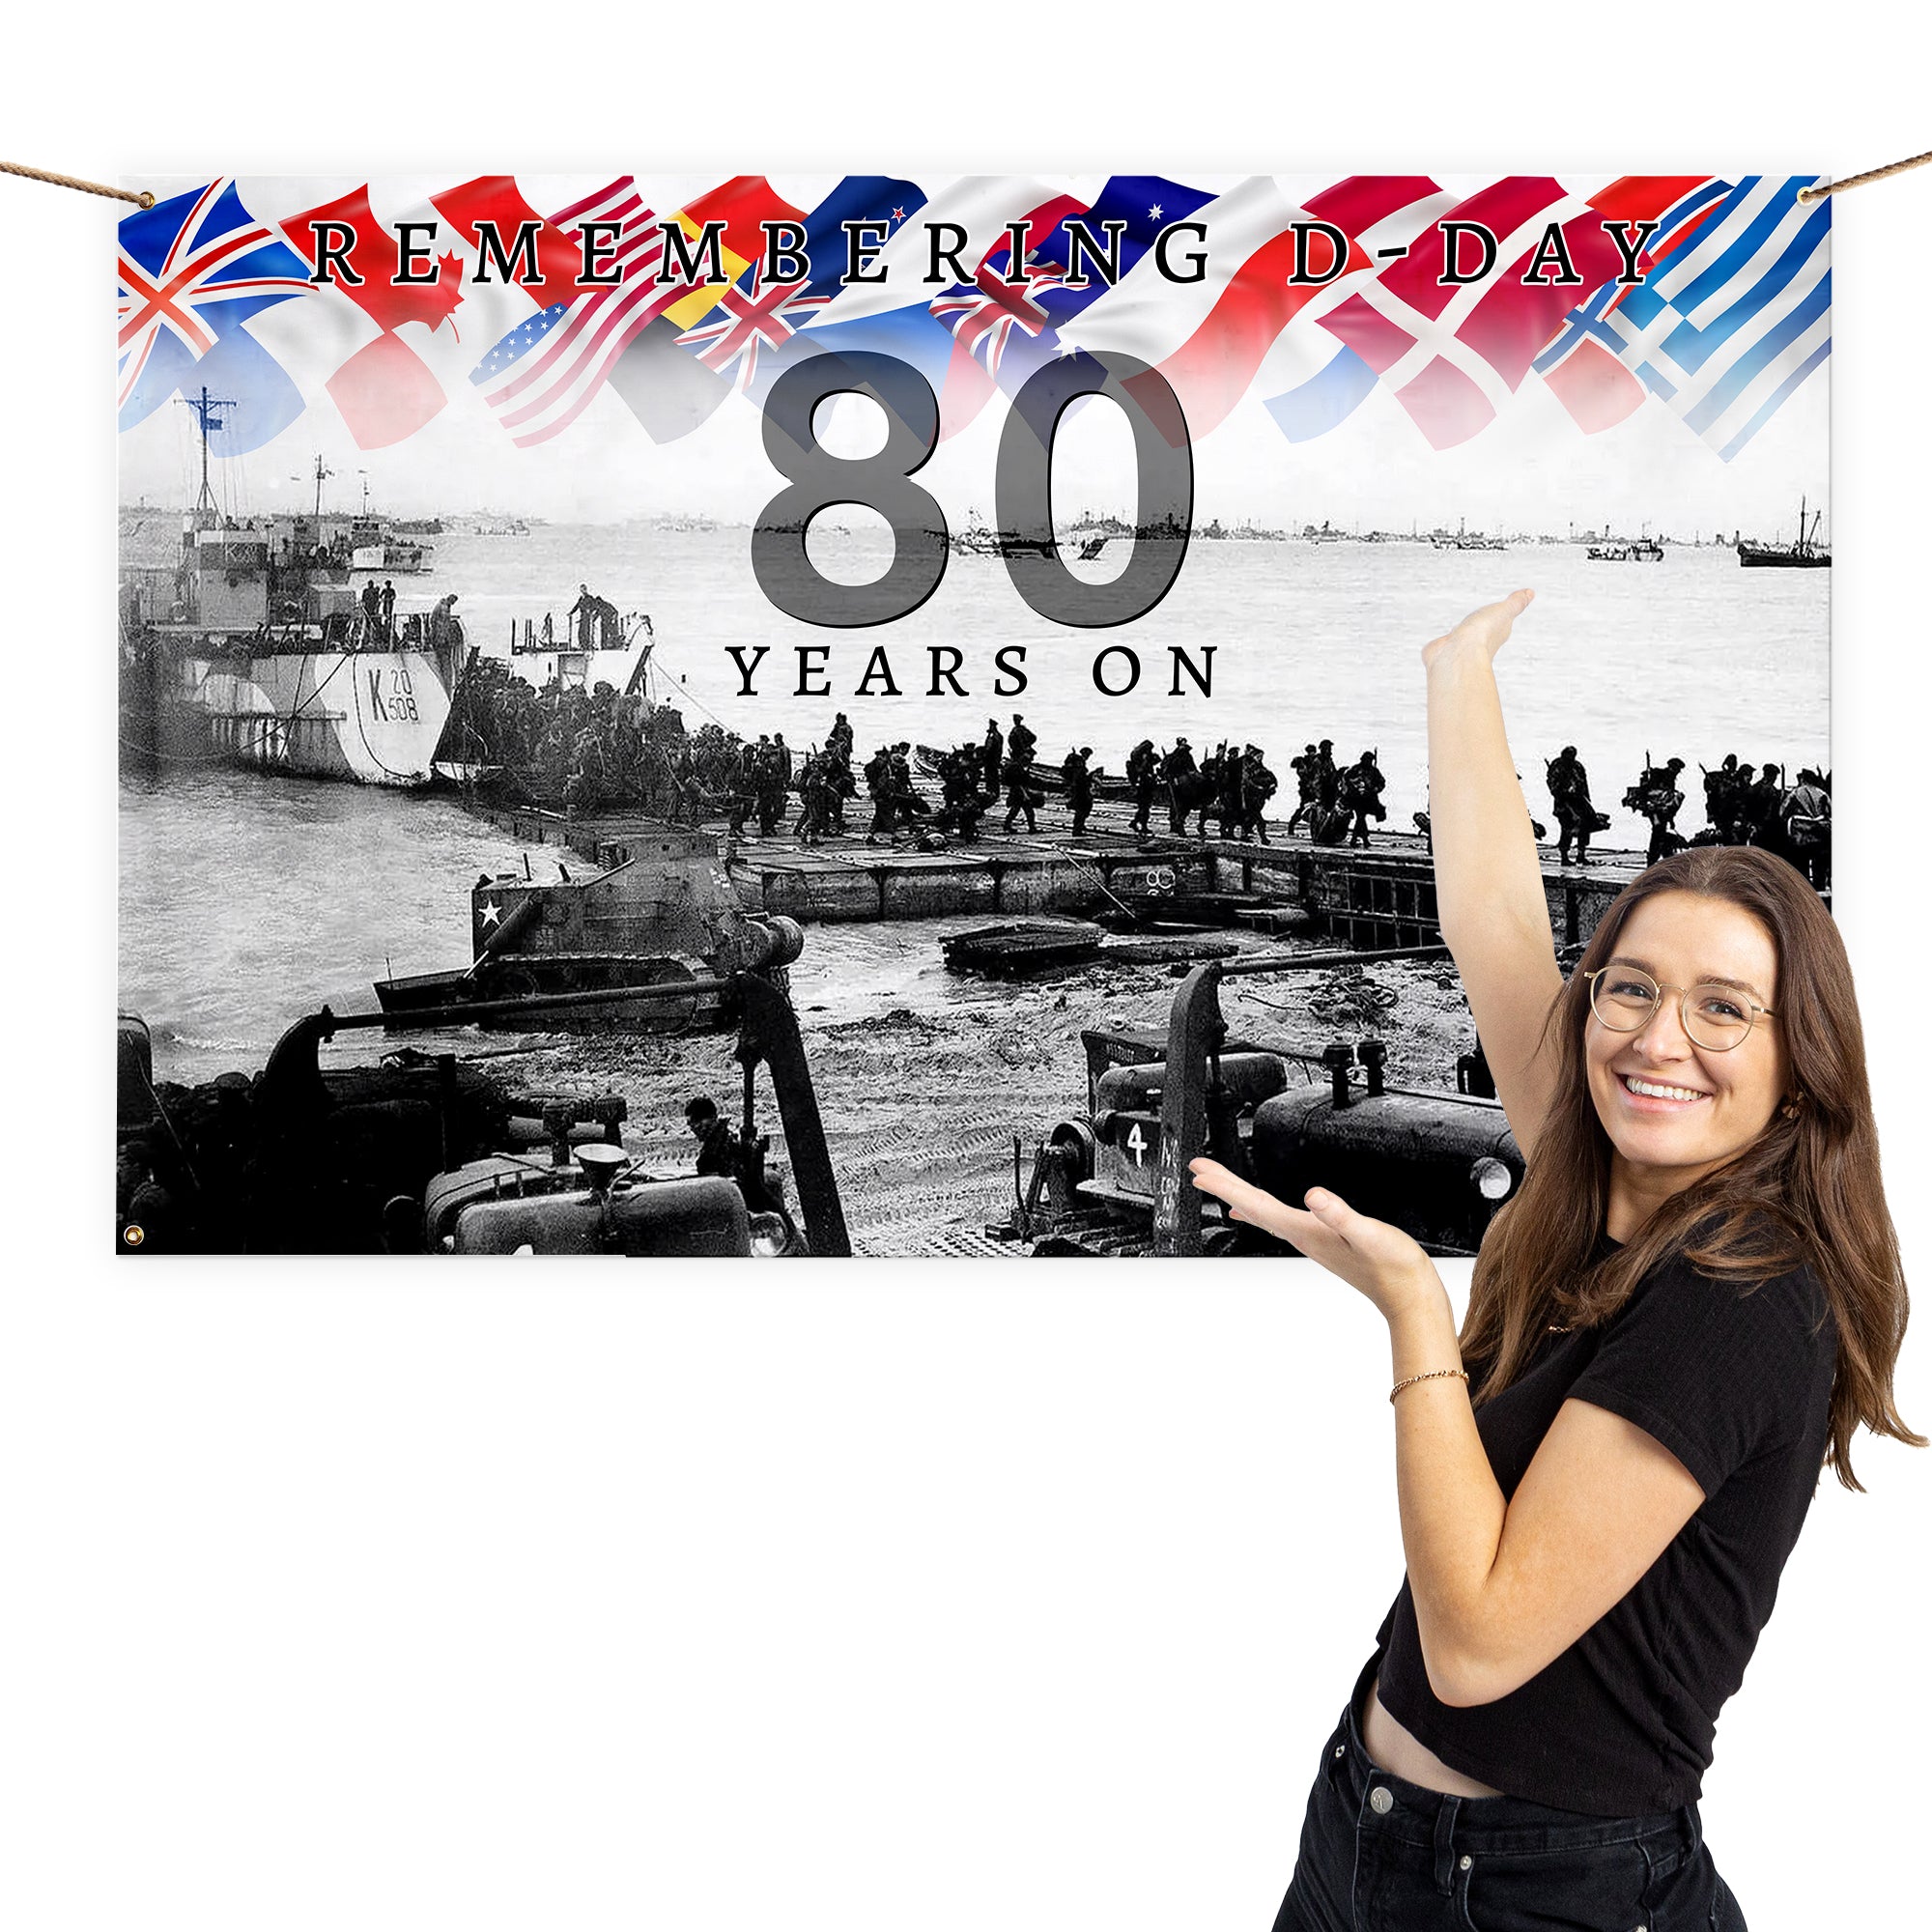 Remembering D-Day 80 Years | Banner - 5ft x 3ft